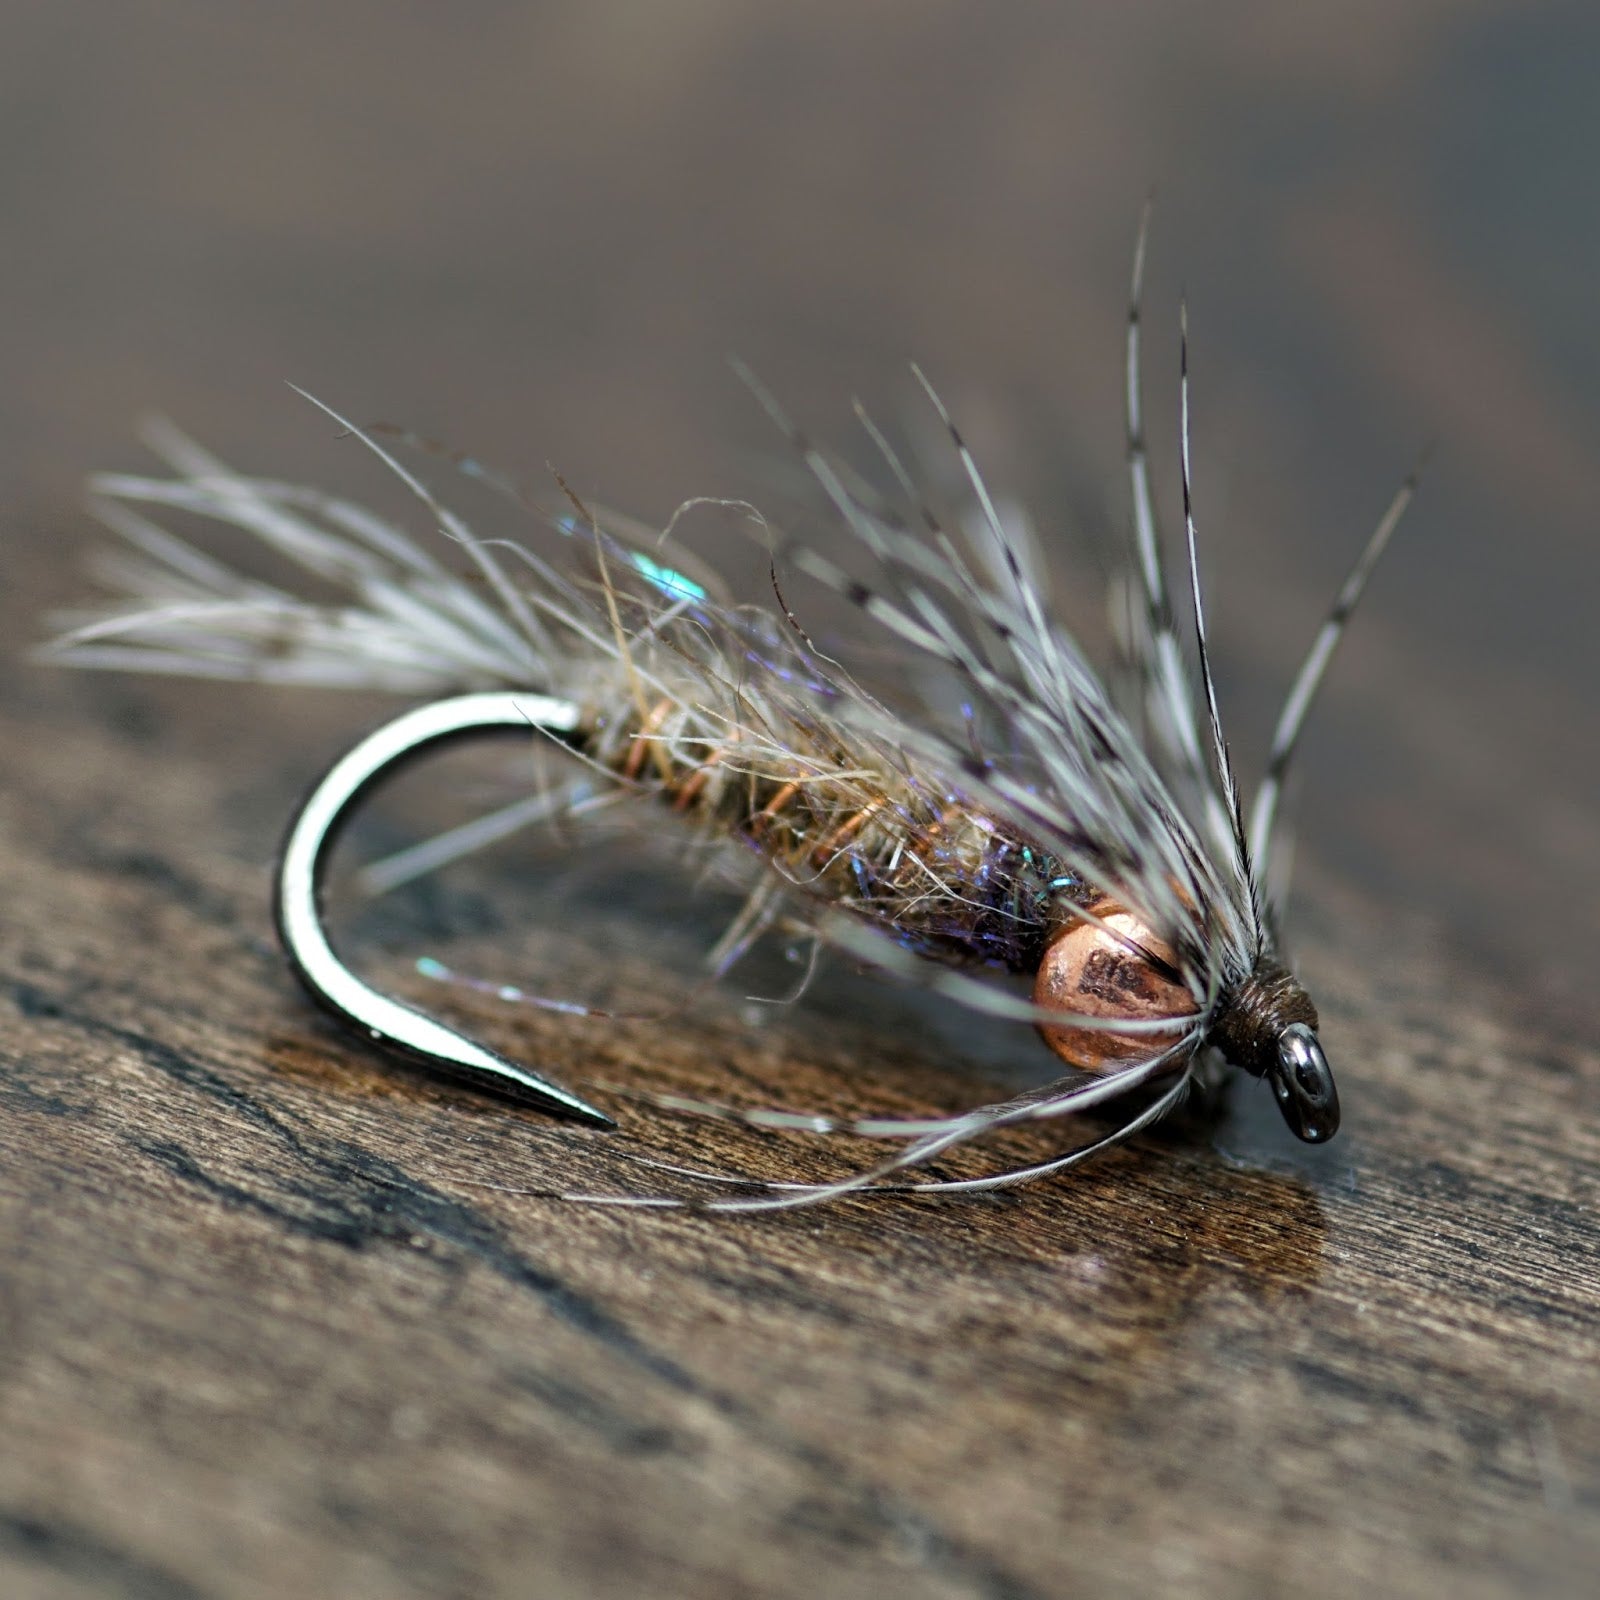 Soft Hackle March Brown